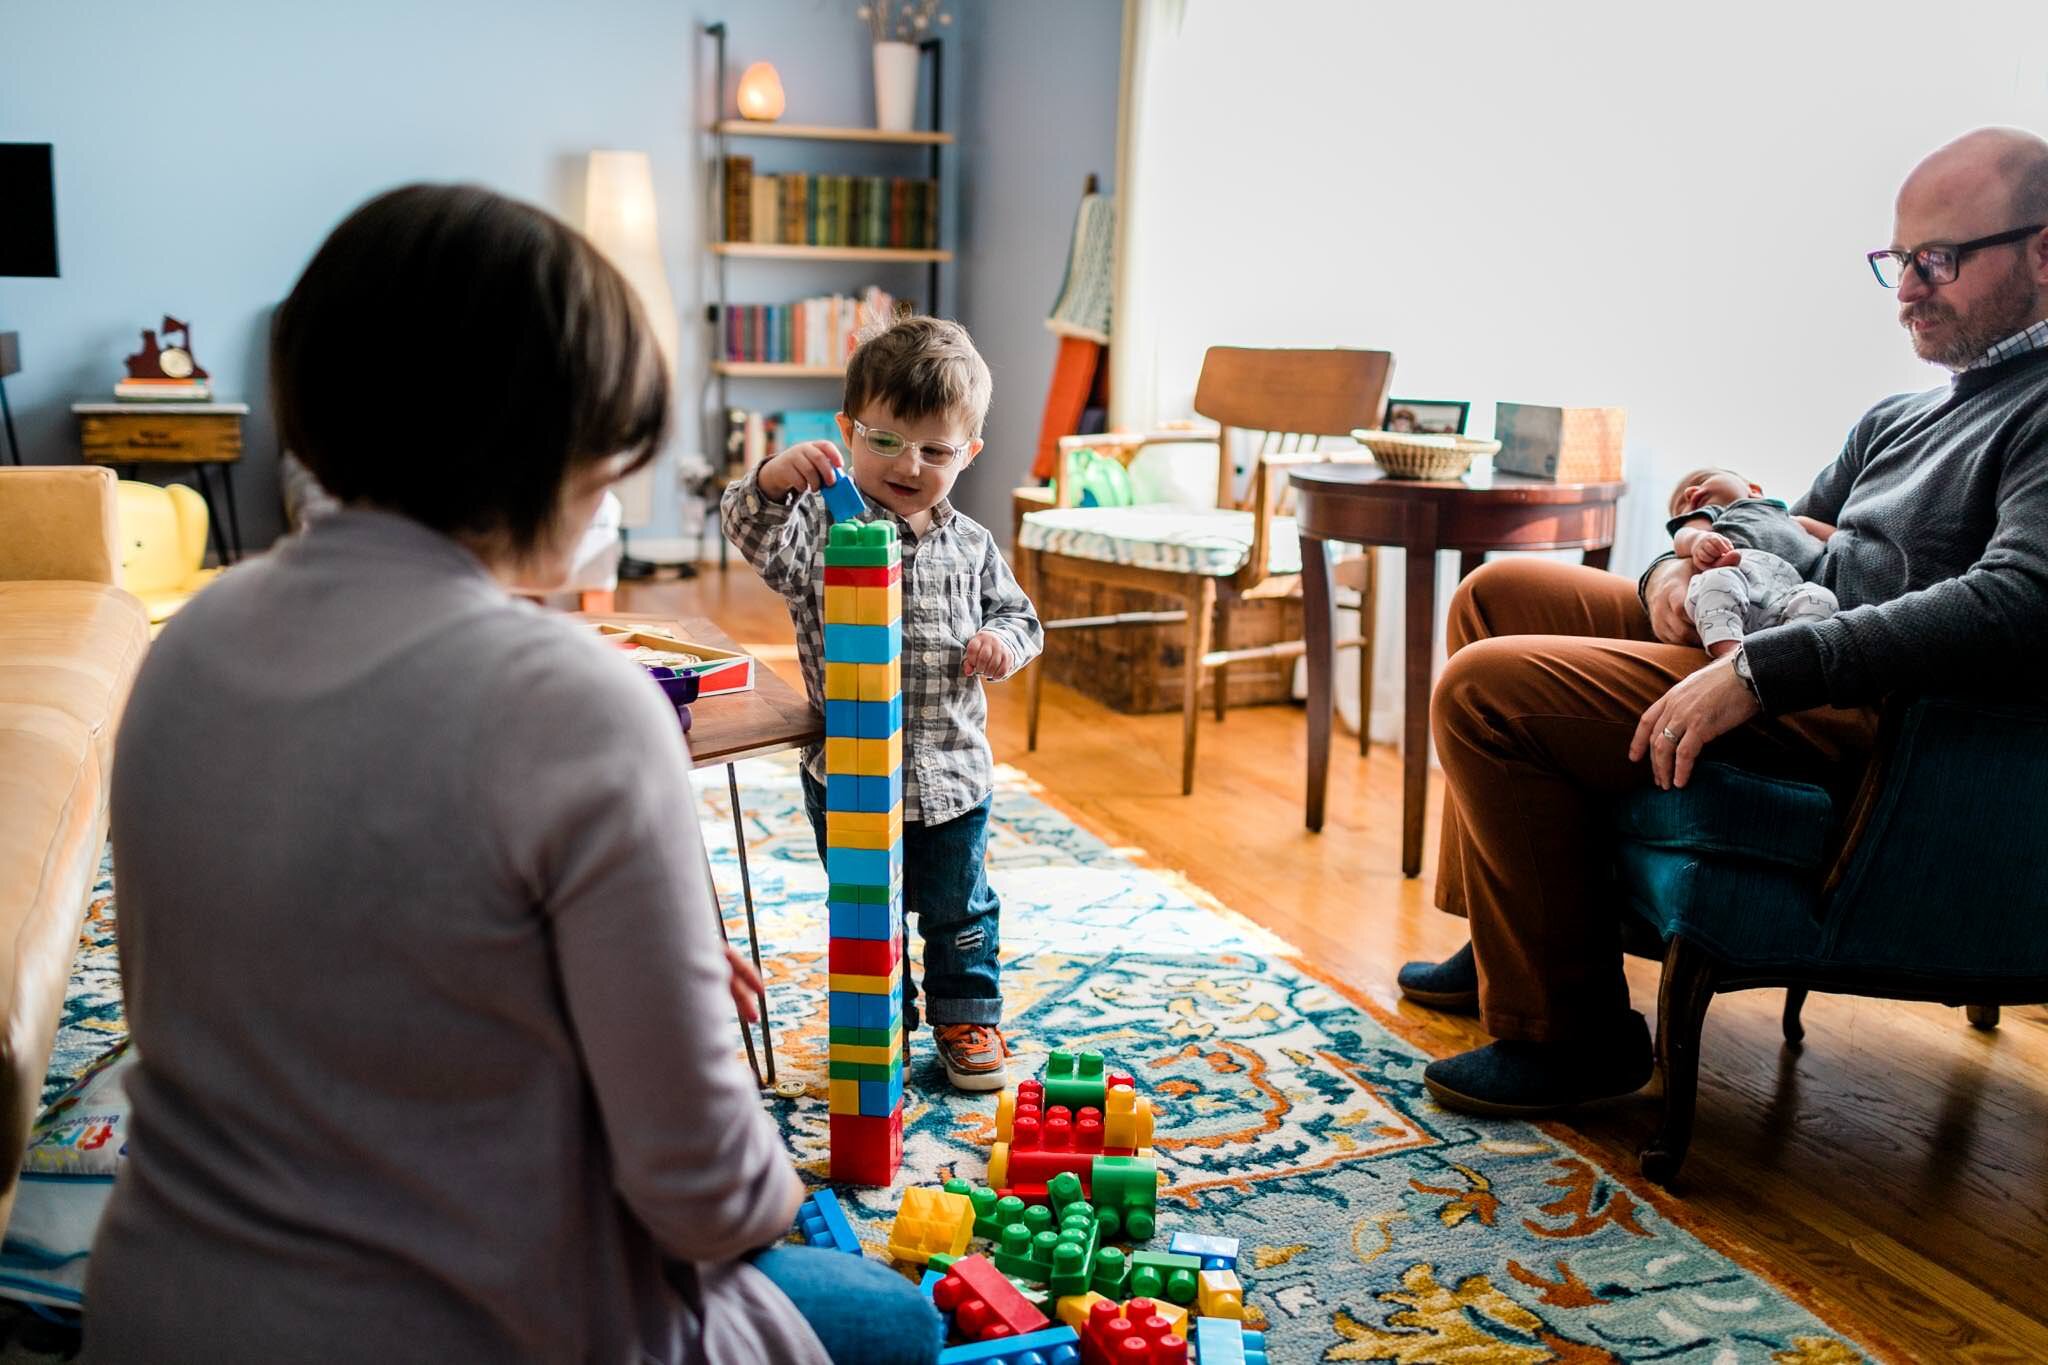 Raleigh Lifestyle Family Photographer | By G. Lin Photography | Family playing together in living room